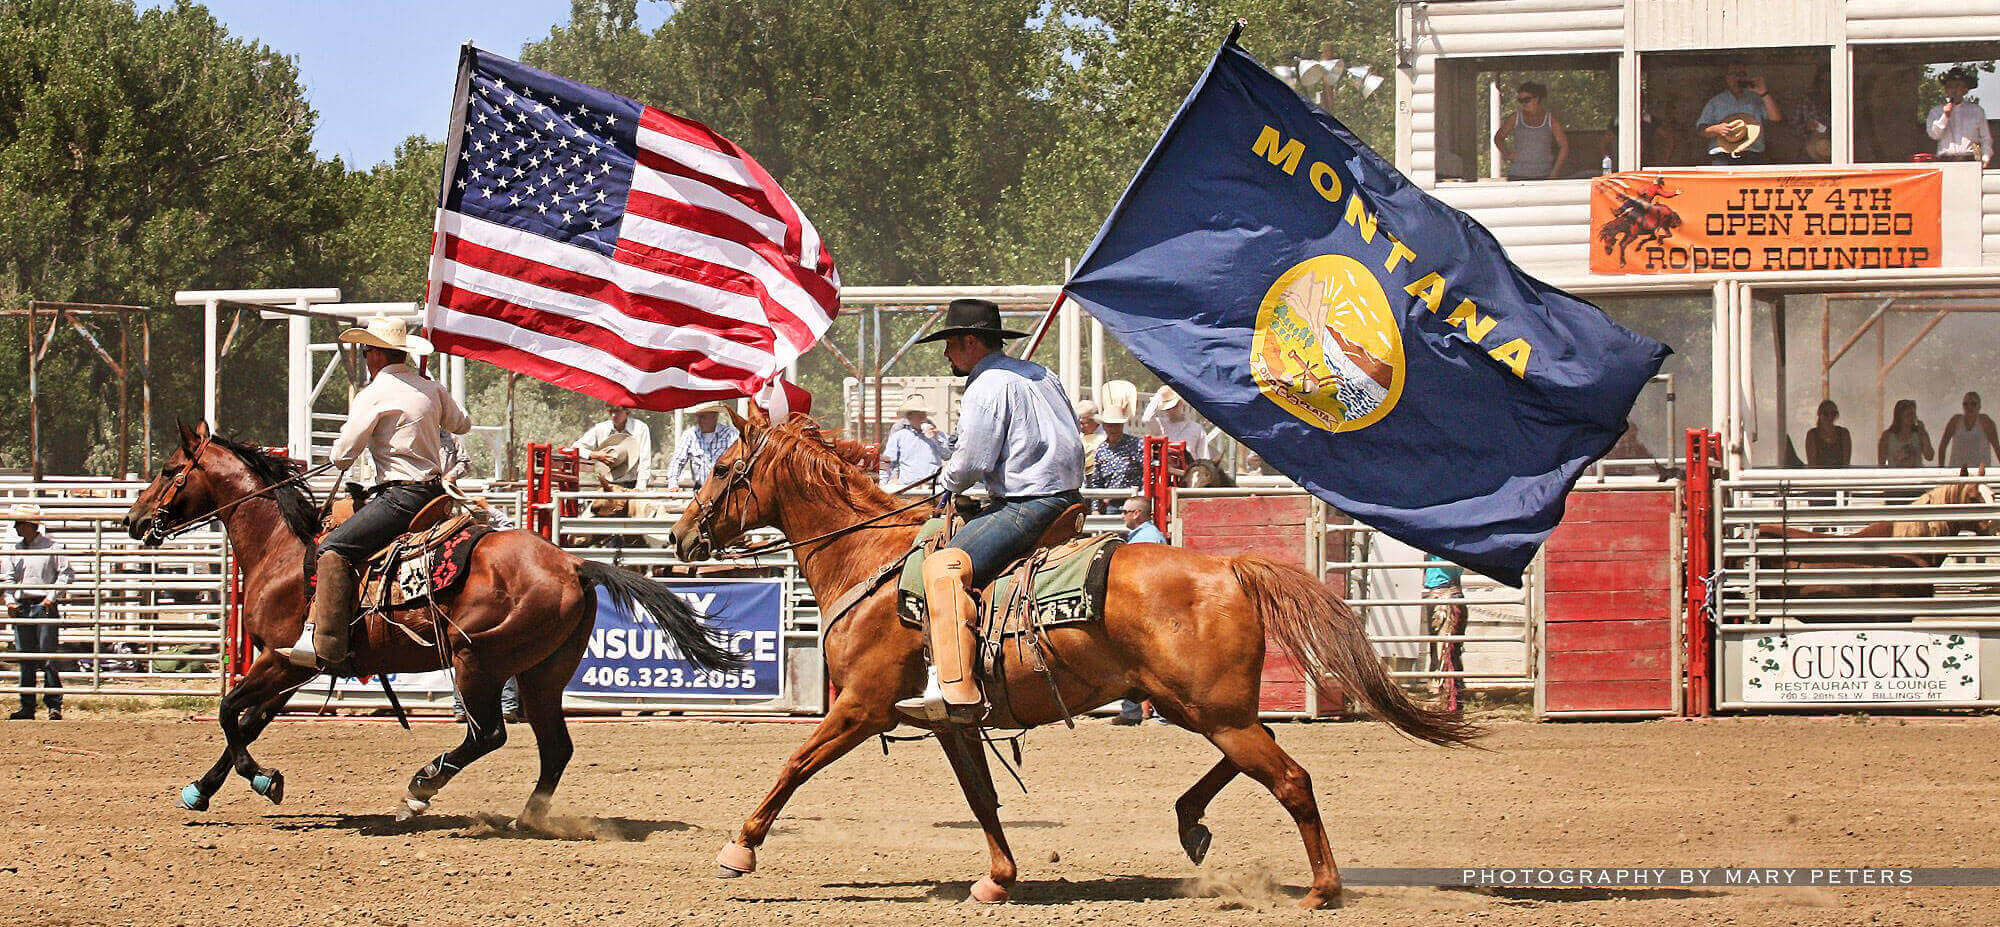 two men on horses at rodeo